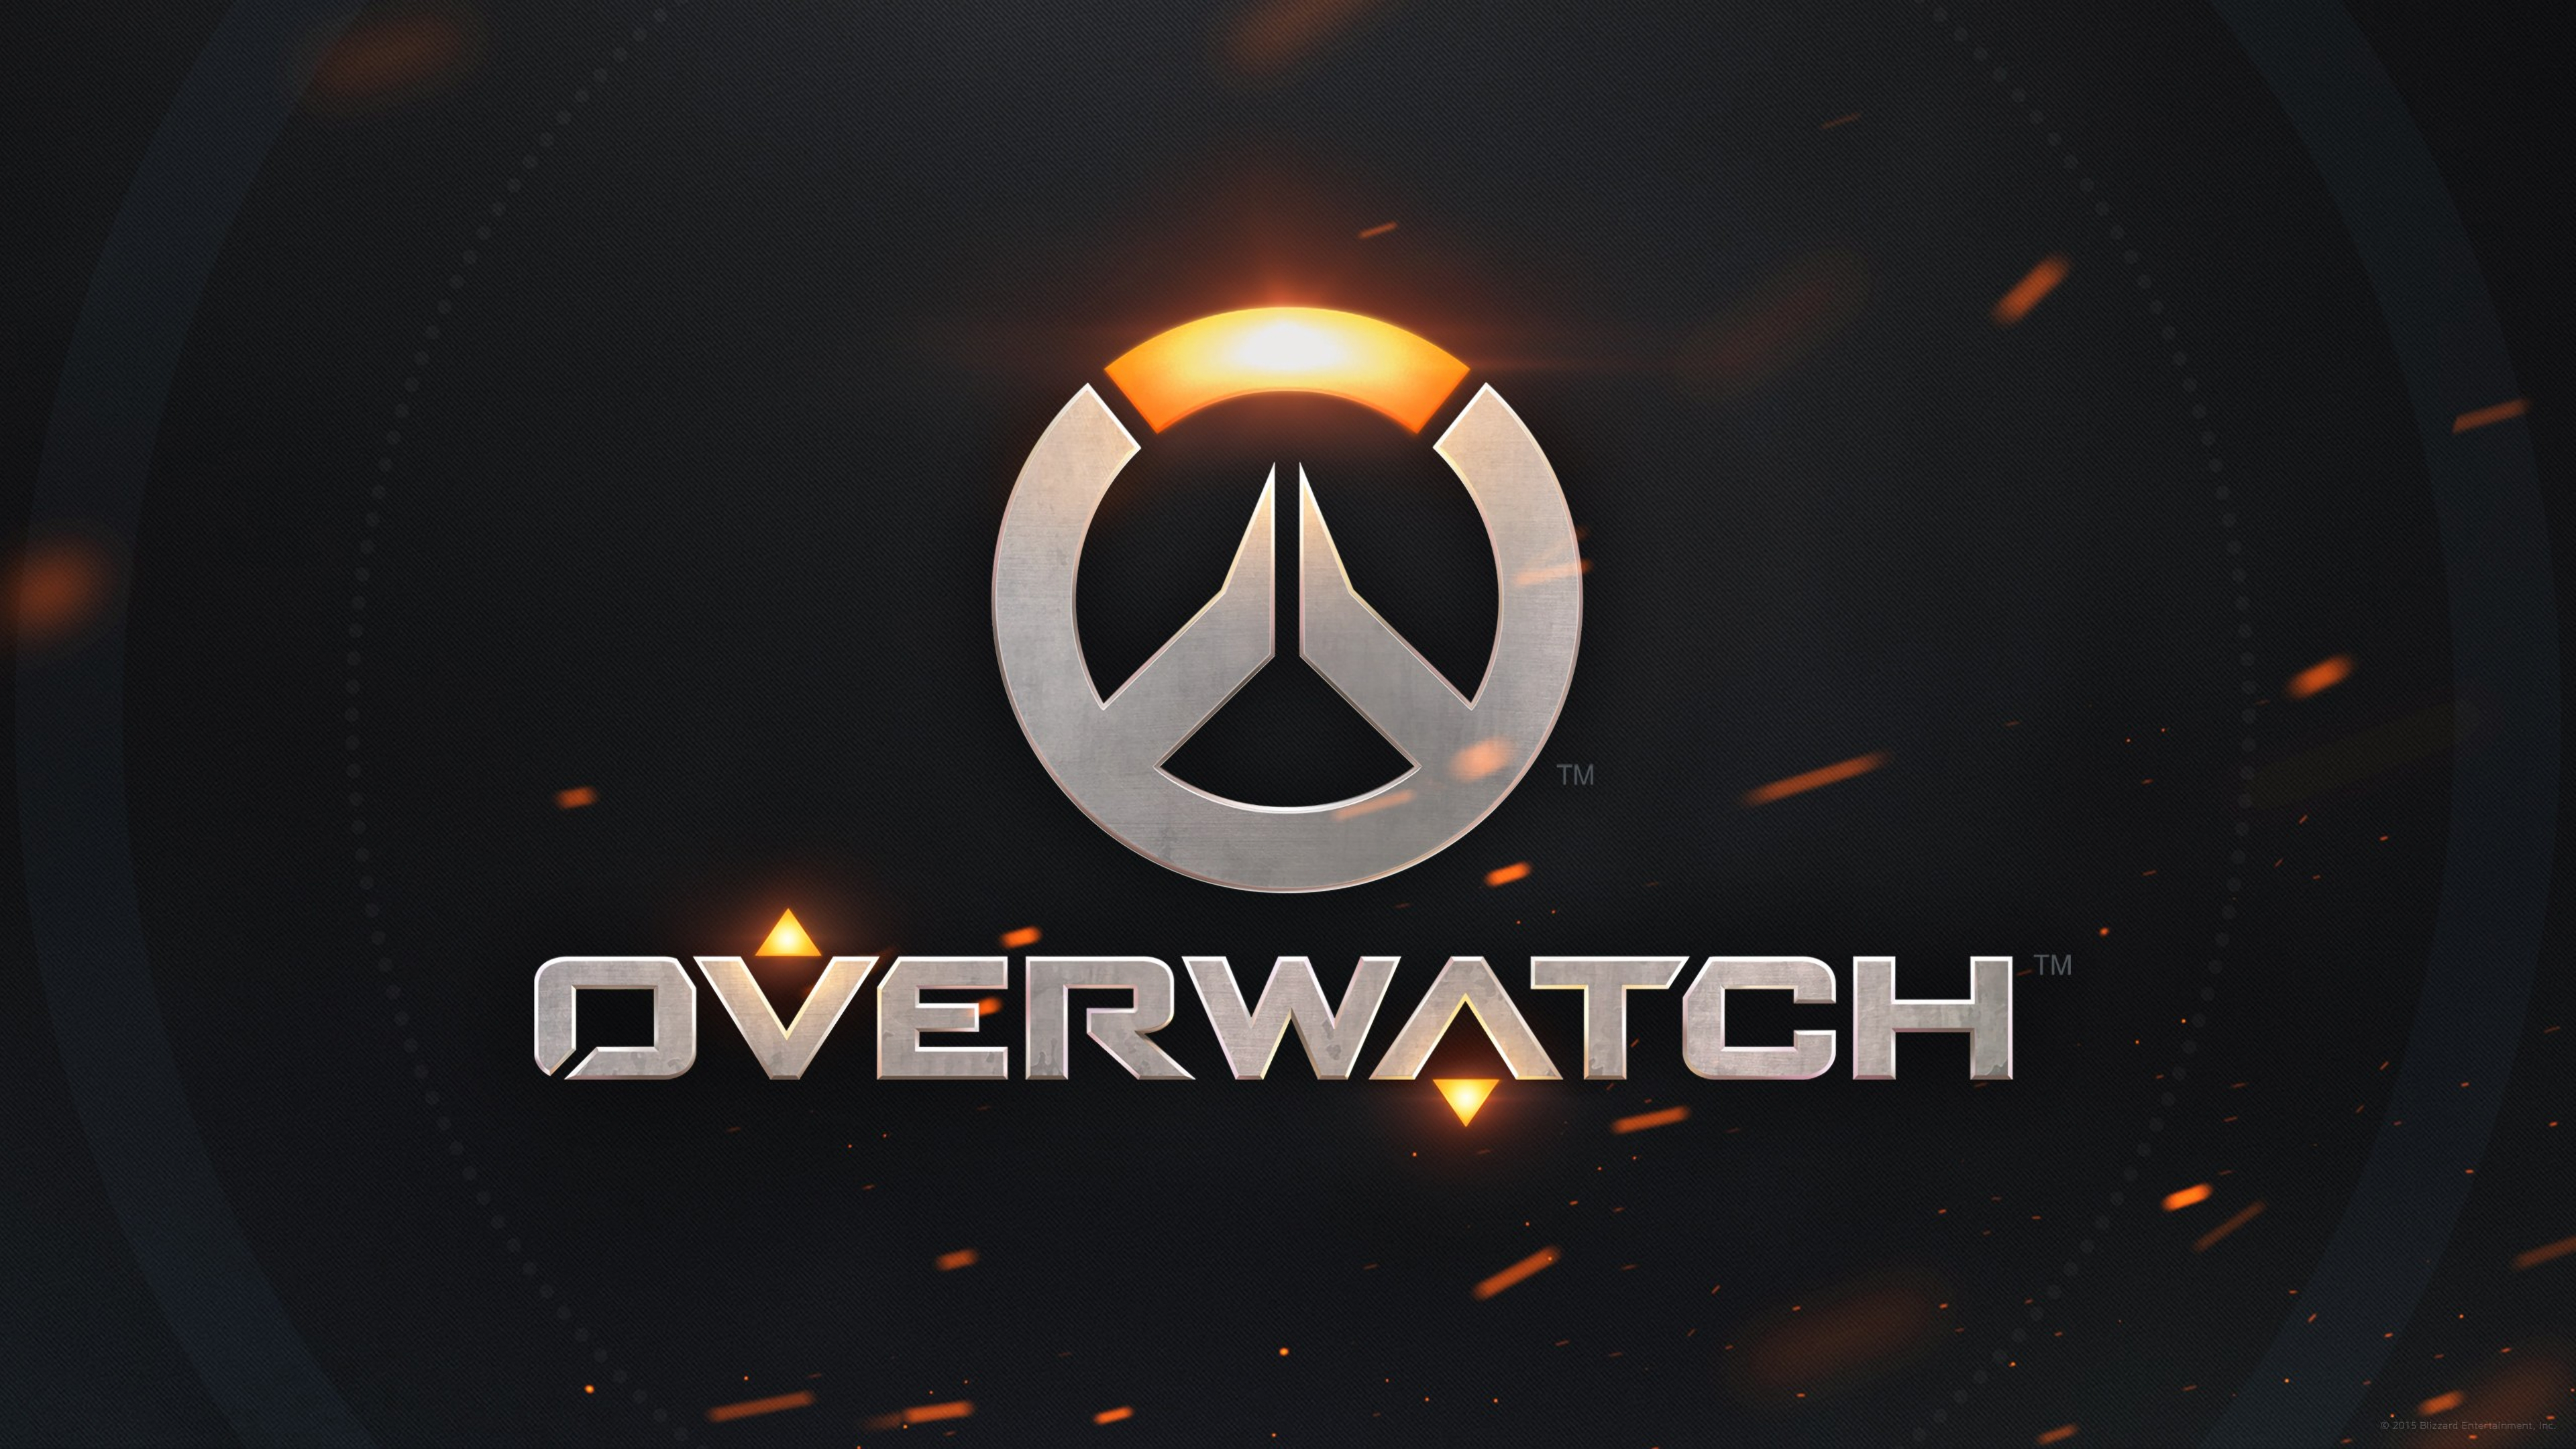 3840x2160 2300+ Overwatch HD Wallpapers and Backgrounds